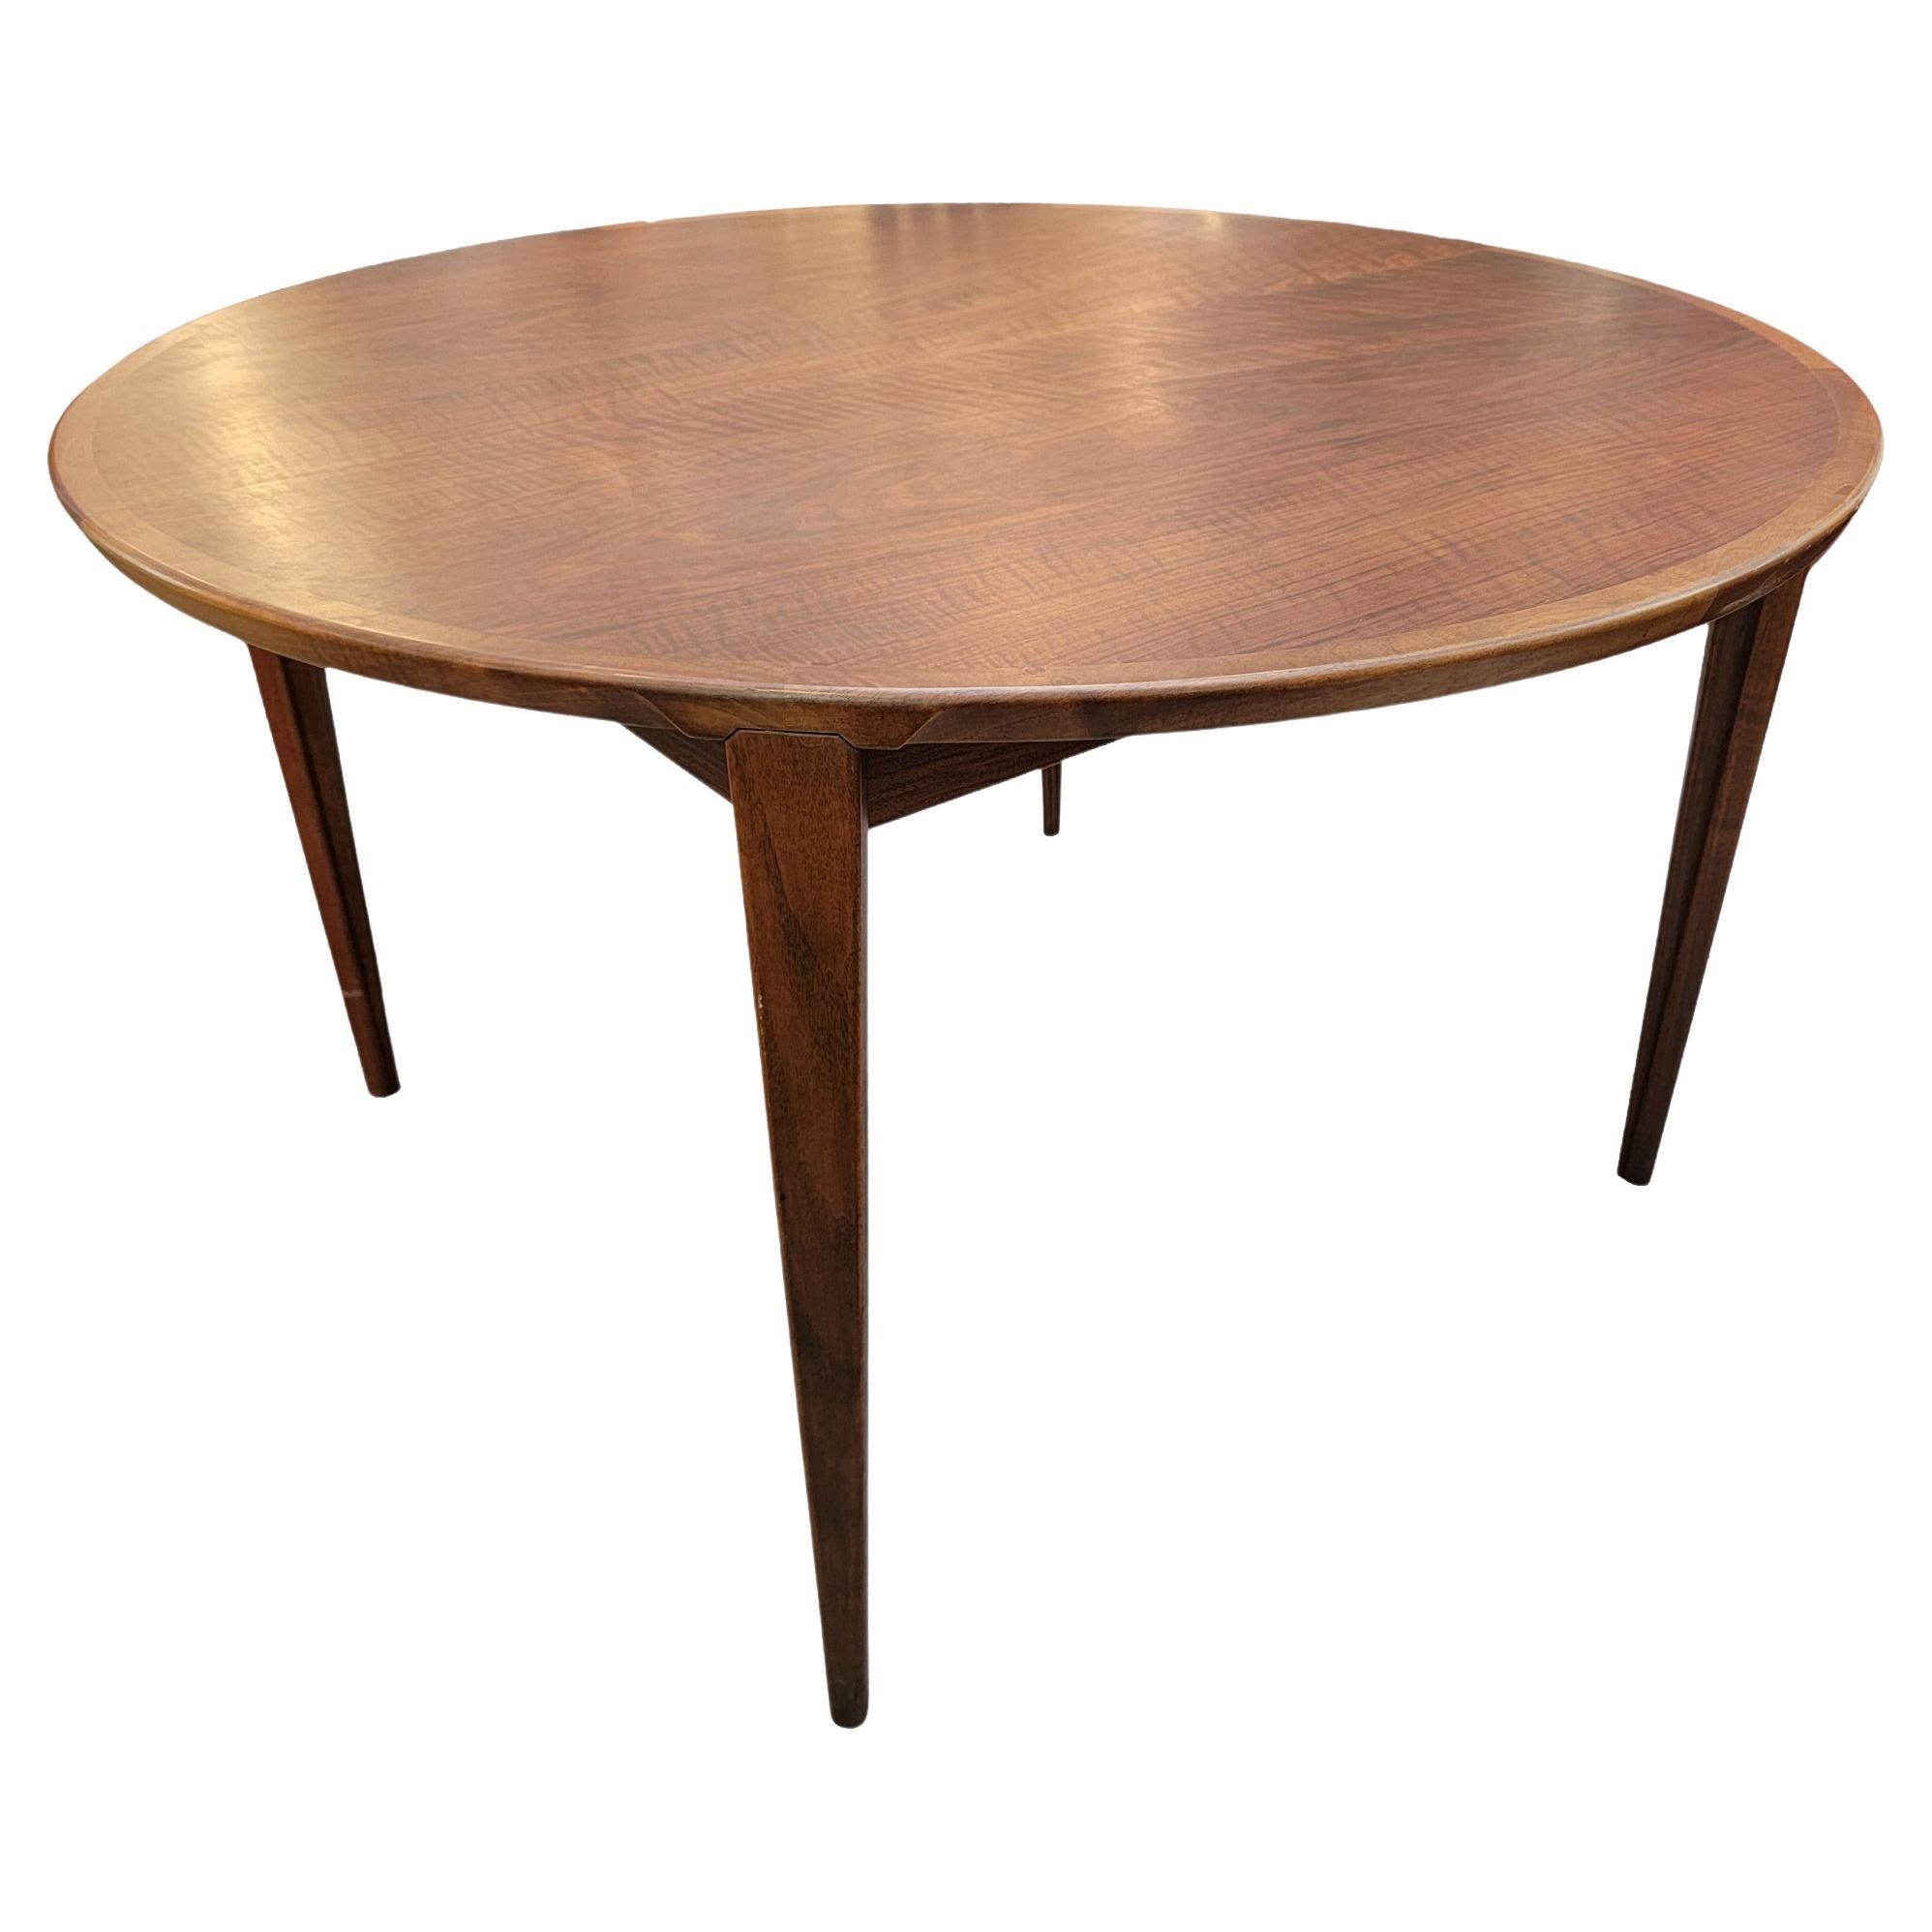 Beautiful red hue dinning table with beautiful grain on the table. The center opens to expose the extra leaf of this table. The leaf is folded in held under the table top and is is held up by 2 smaller pieces of wood. 
When connected the center leaf